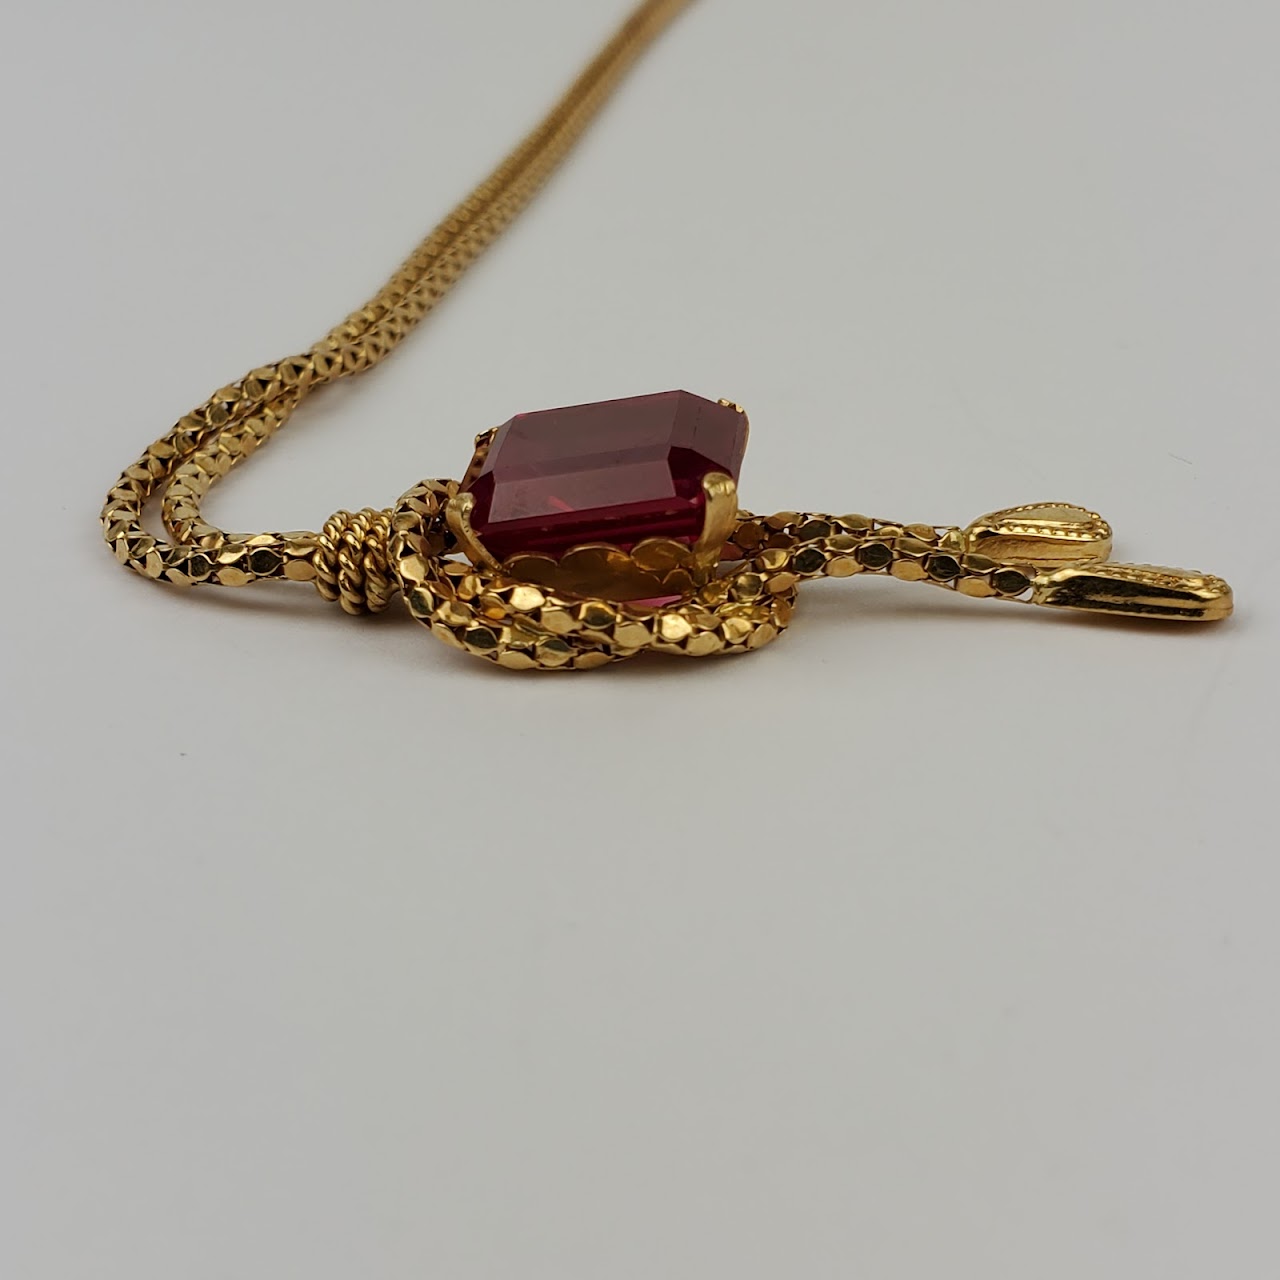 18K Gold and Red Gemstone Pendant Necklace